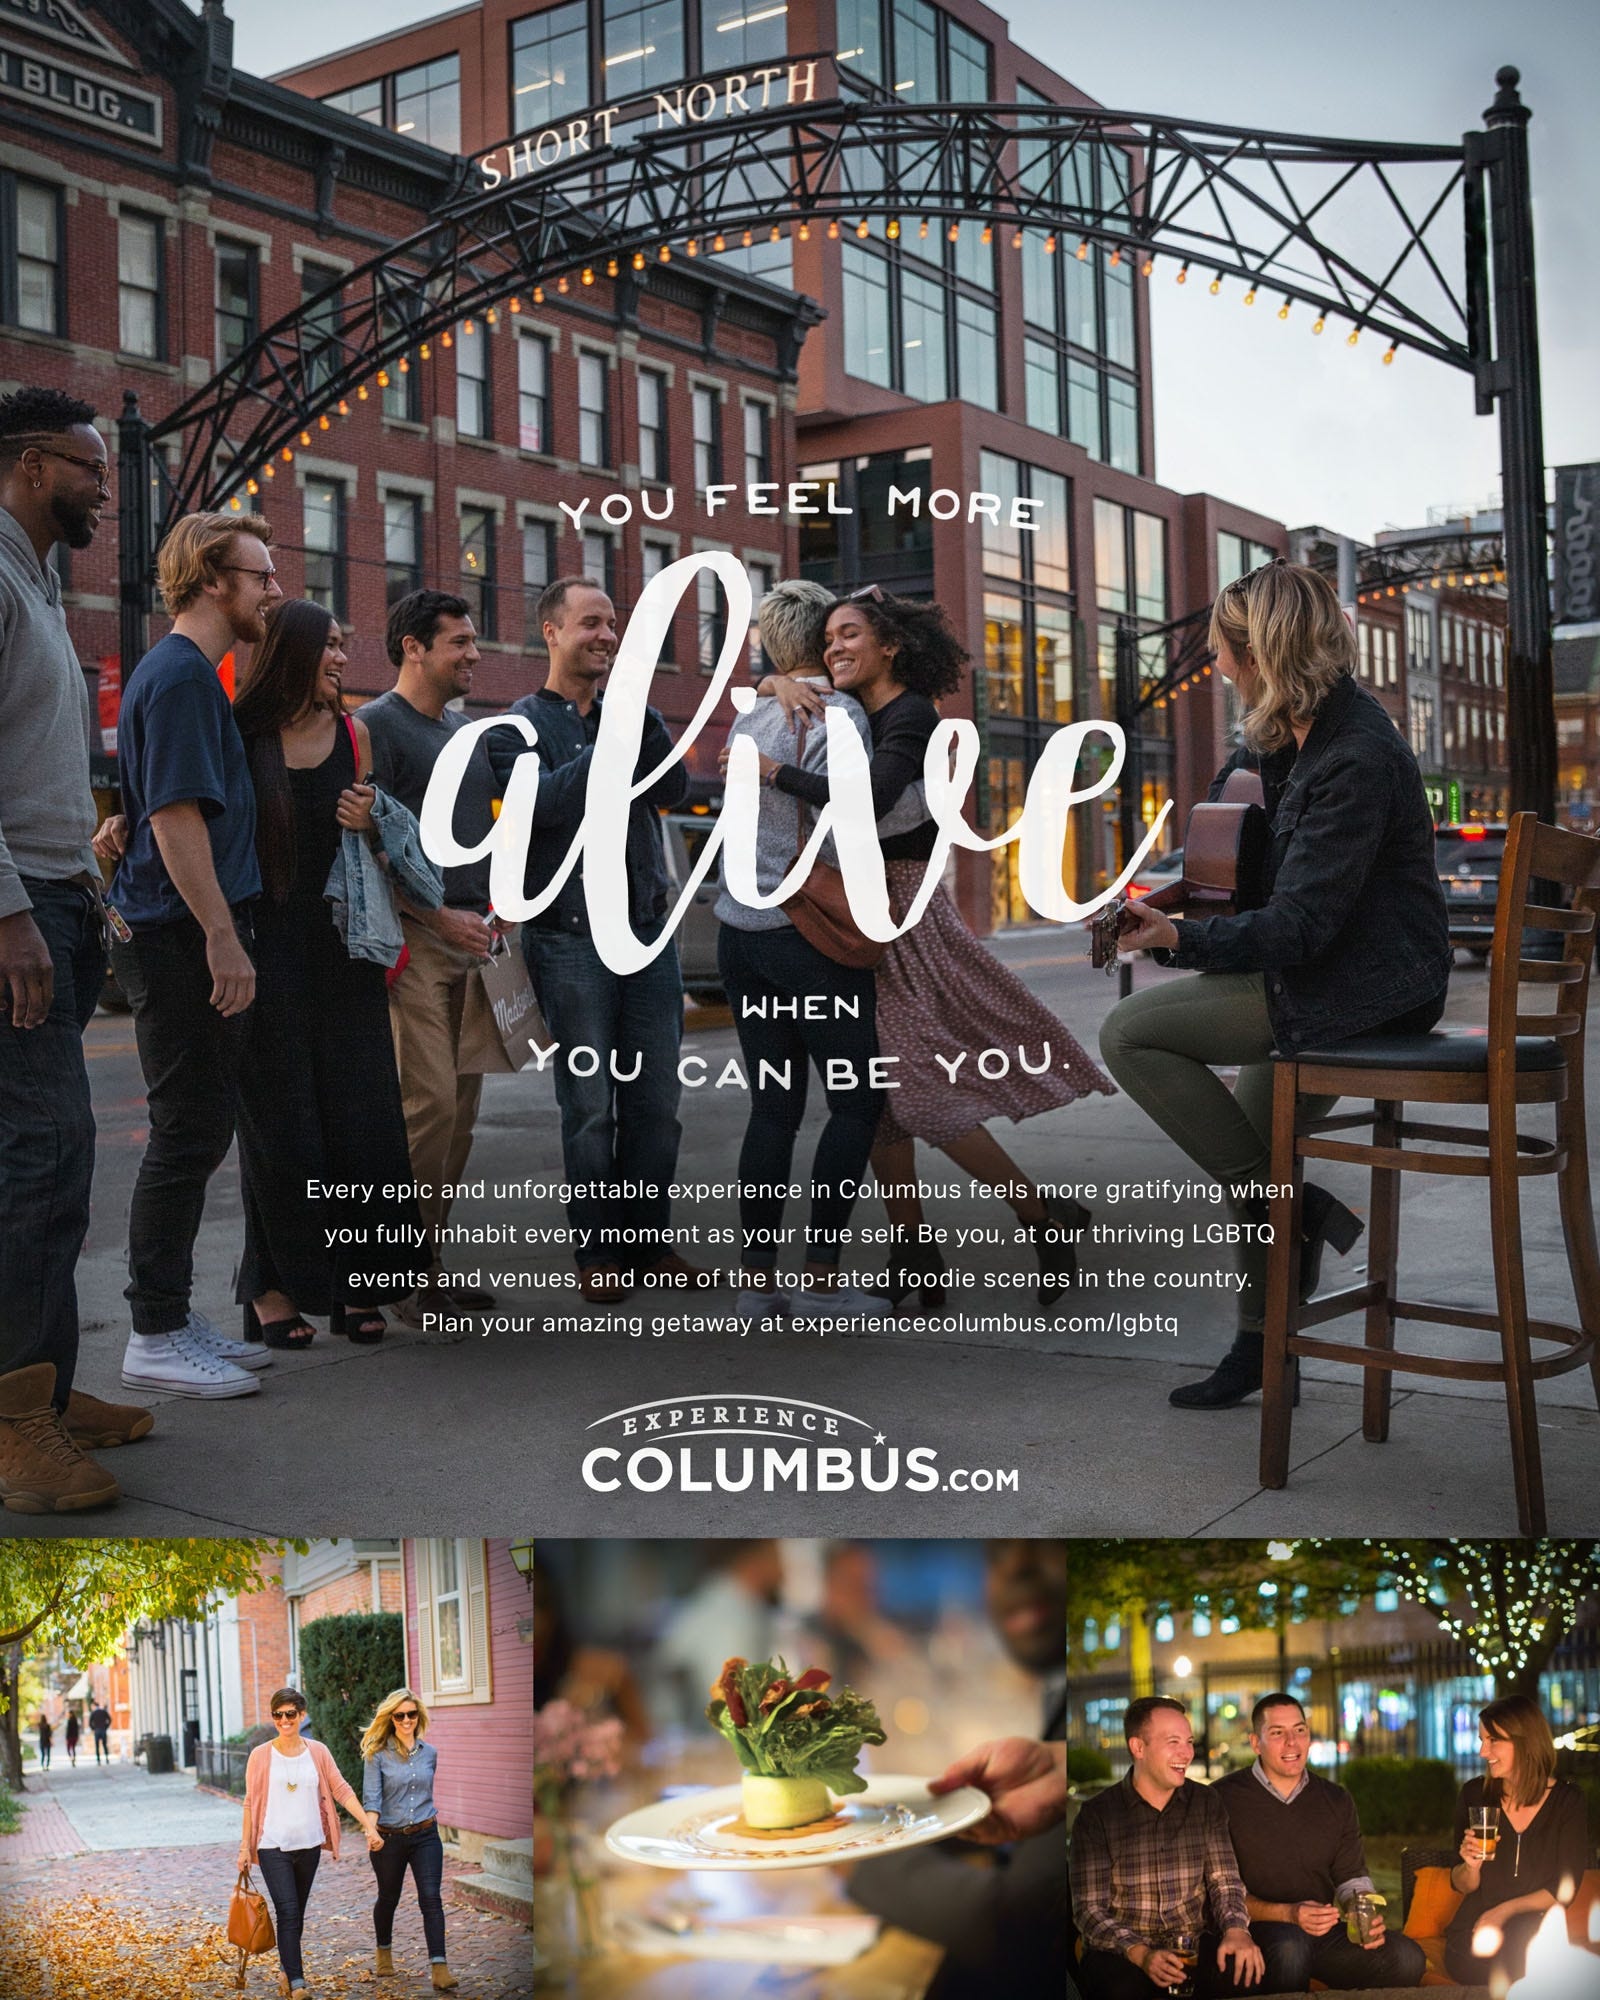 Experience Columbus launches tourism campaign aimed at LGBTQ travelers